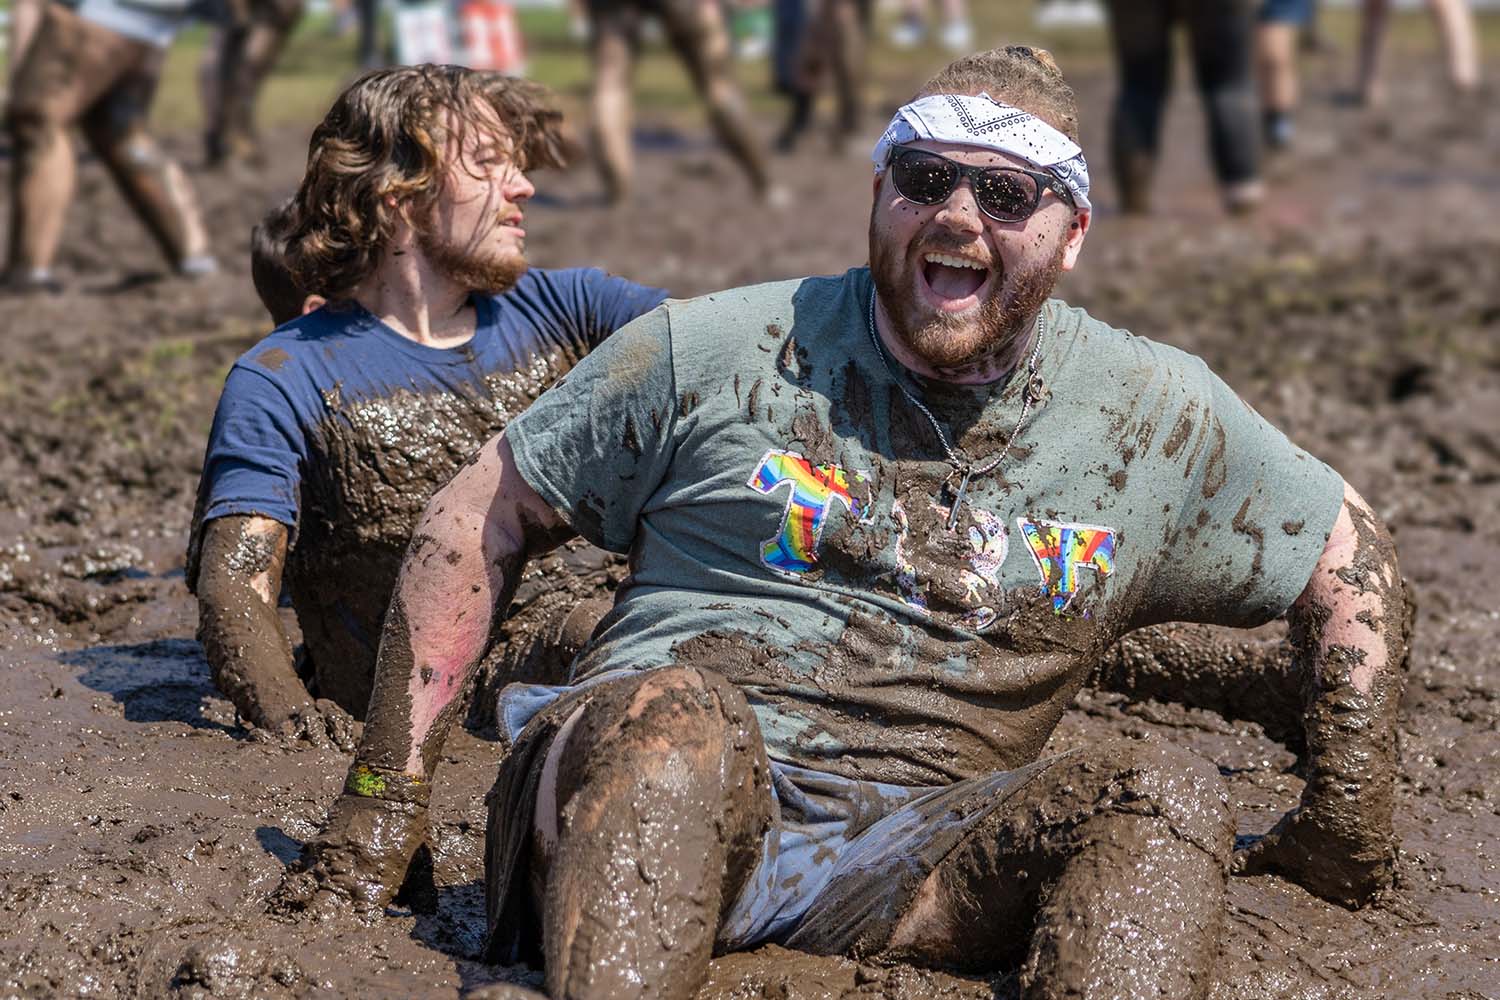 students laugh as they fall into the mud